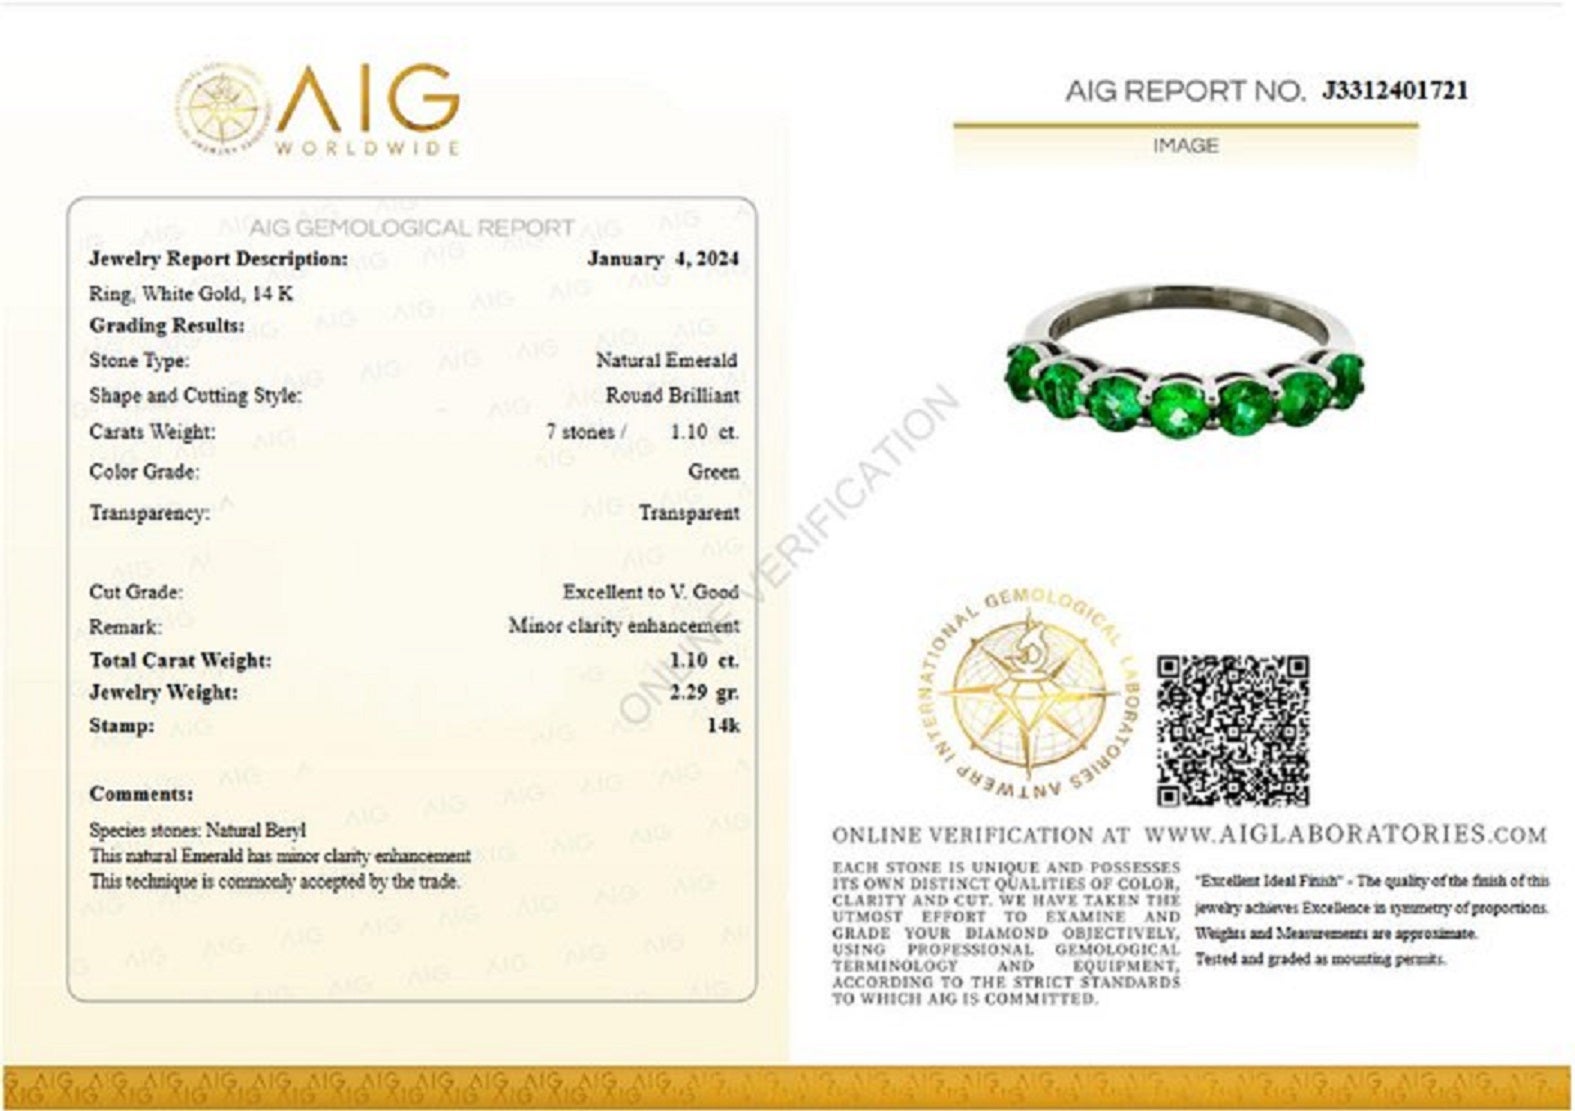 Ring Size: 52 EU
Ring can be sized free of charge prior to shipping out.

Center Natural  Emeralds:
Weight: 1.10 Carat / 7 pieces
Color: Green
Shape: Round Brilliant
Minor Clarity Enhancement

Item ships from Israeli Diamonds Exchange, customers are